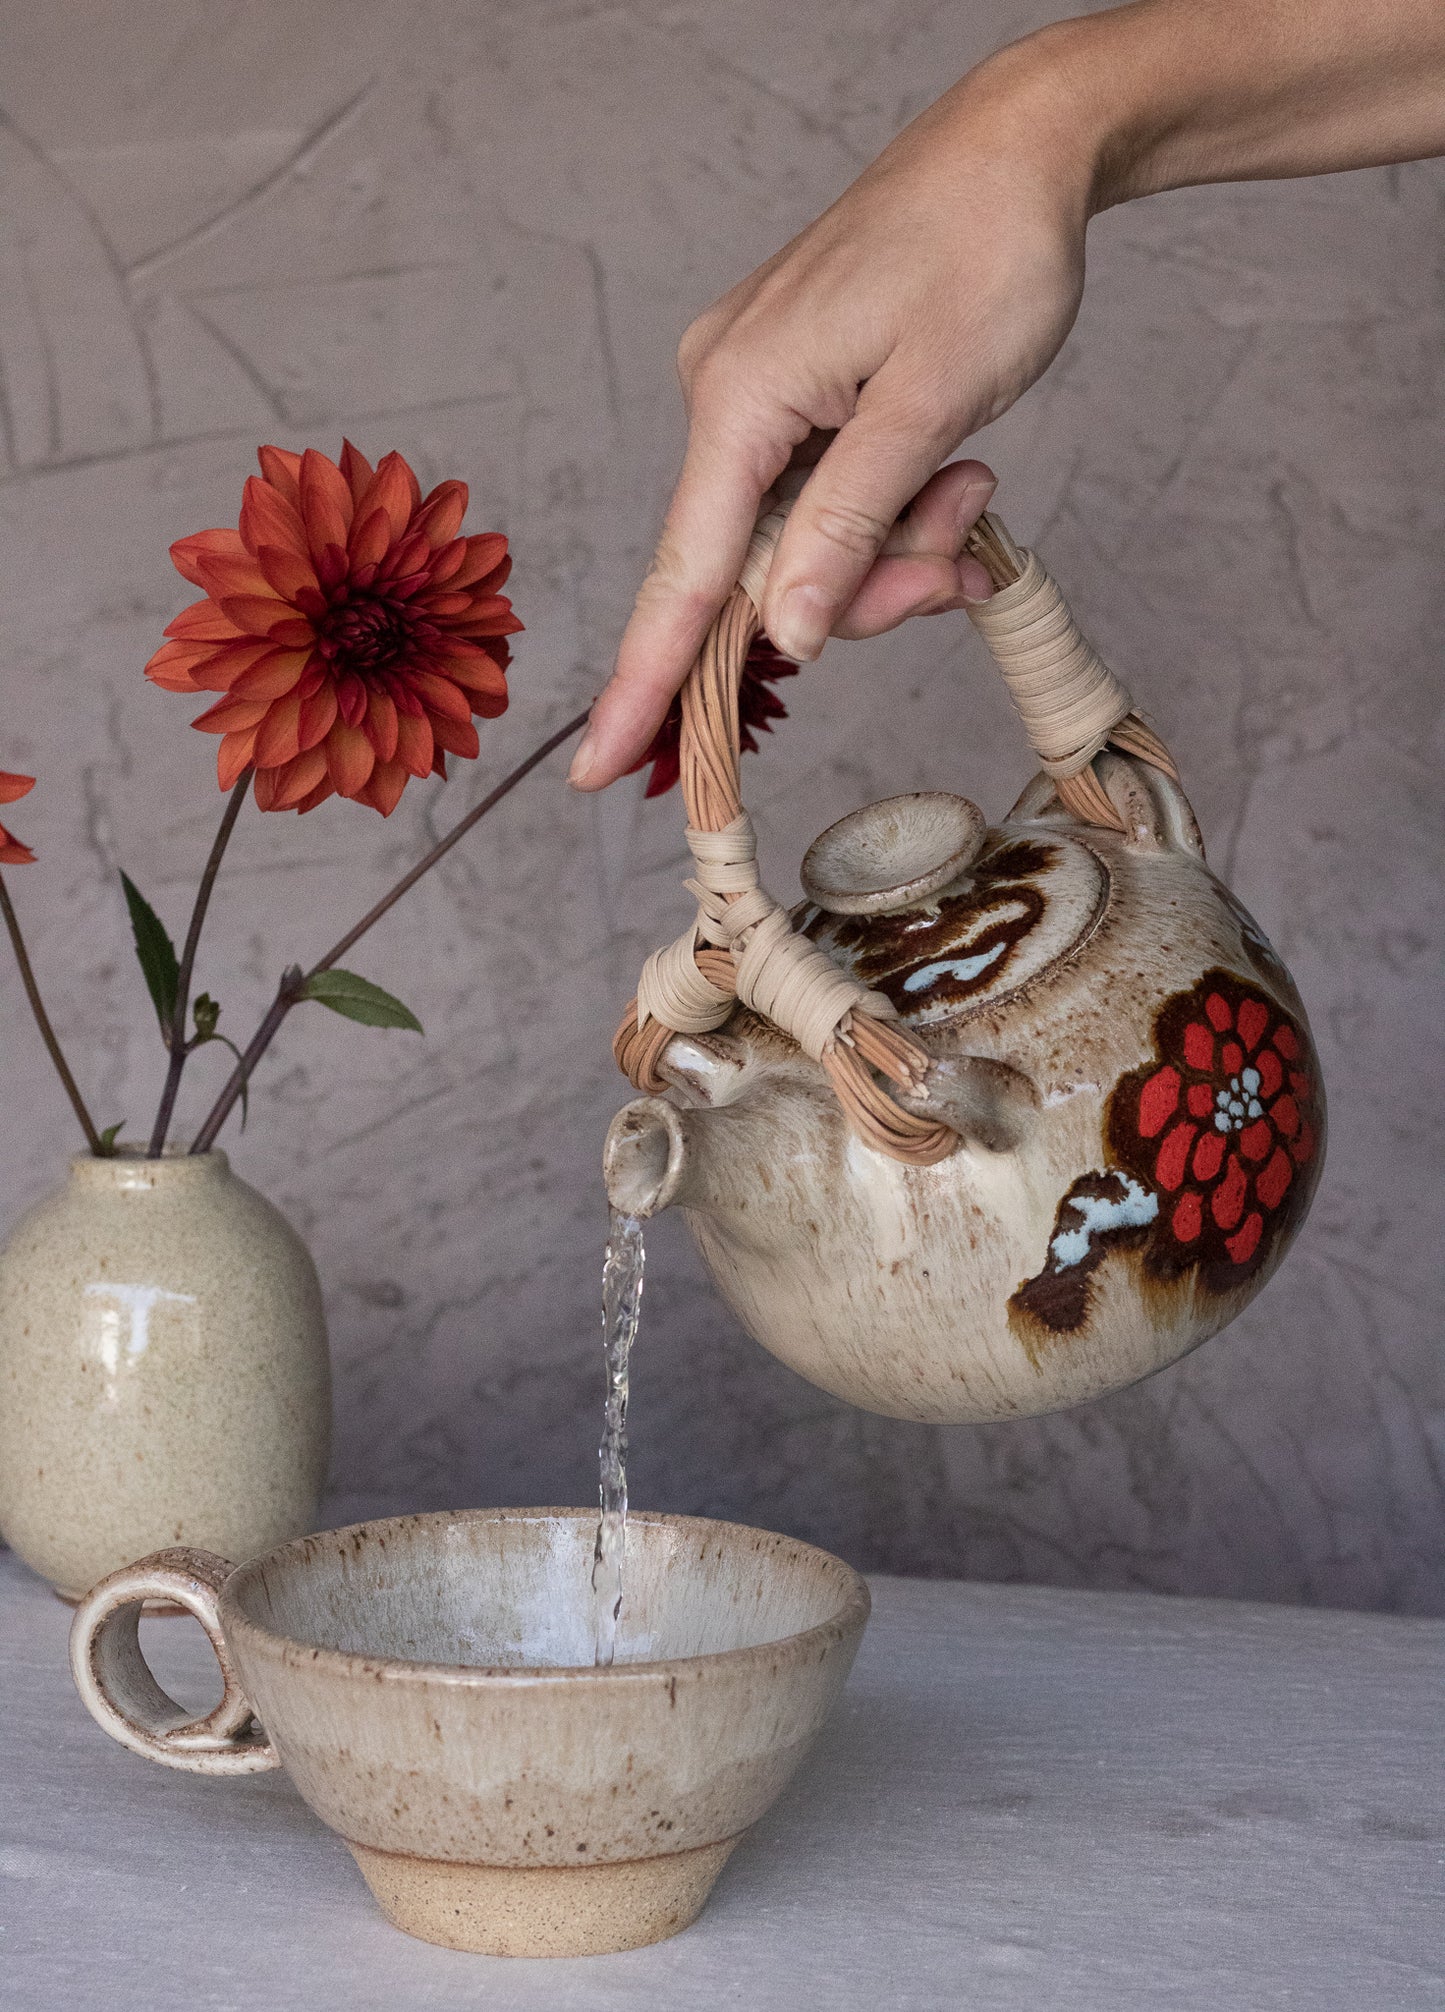 Zinna Teapot with Artist Made Reed Handle